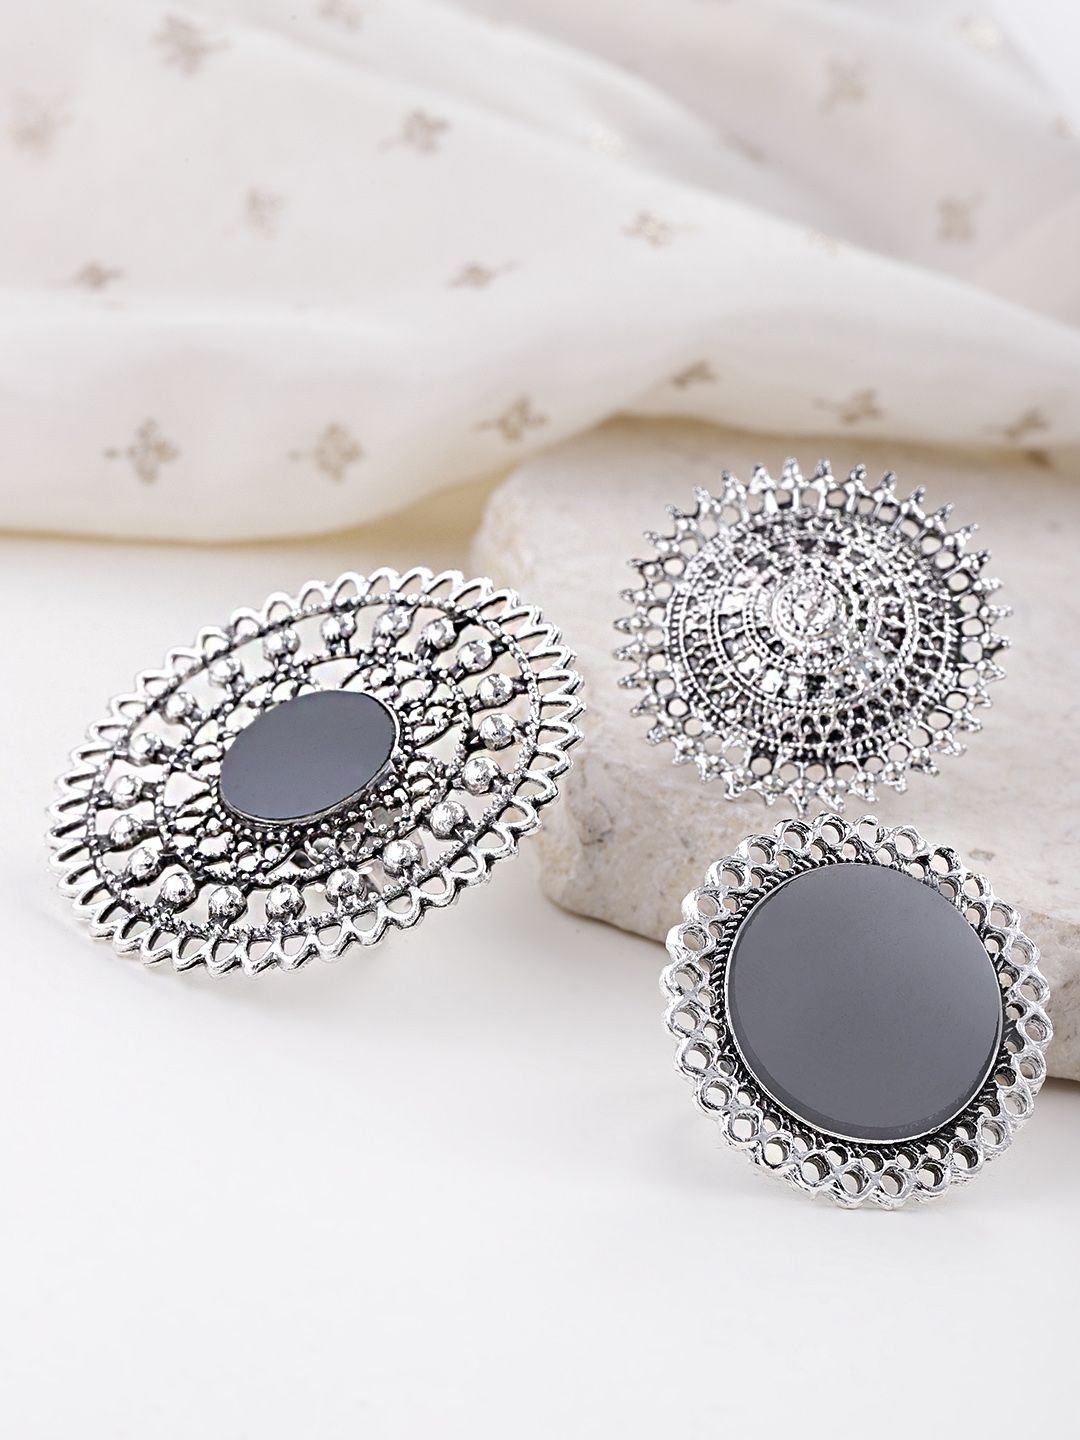 YouBella Set of 3 Oxidised Silver-Plated Afgan Adjustable Finger Rings Price in India